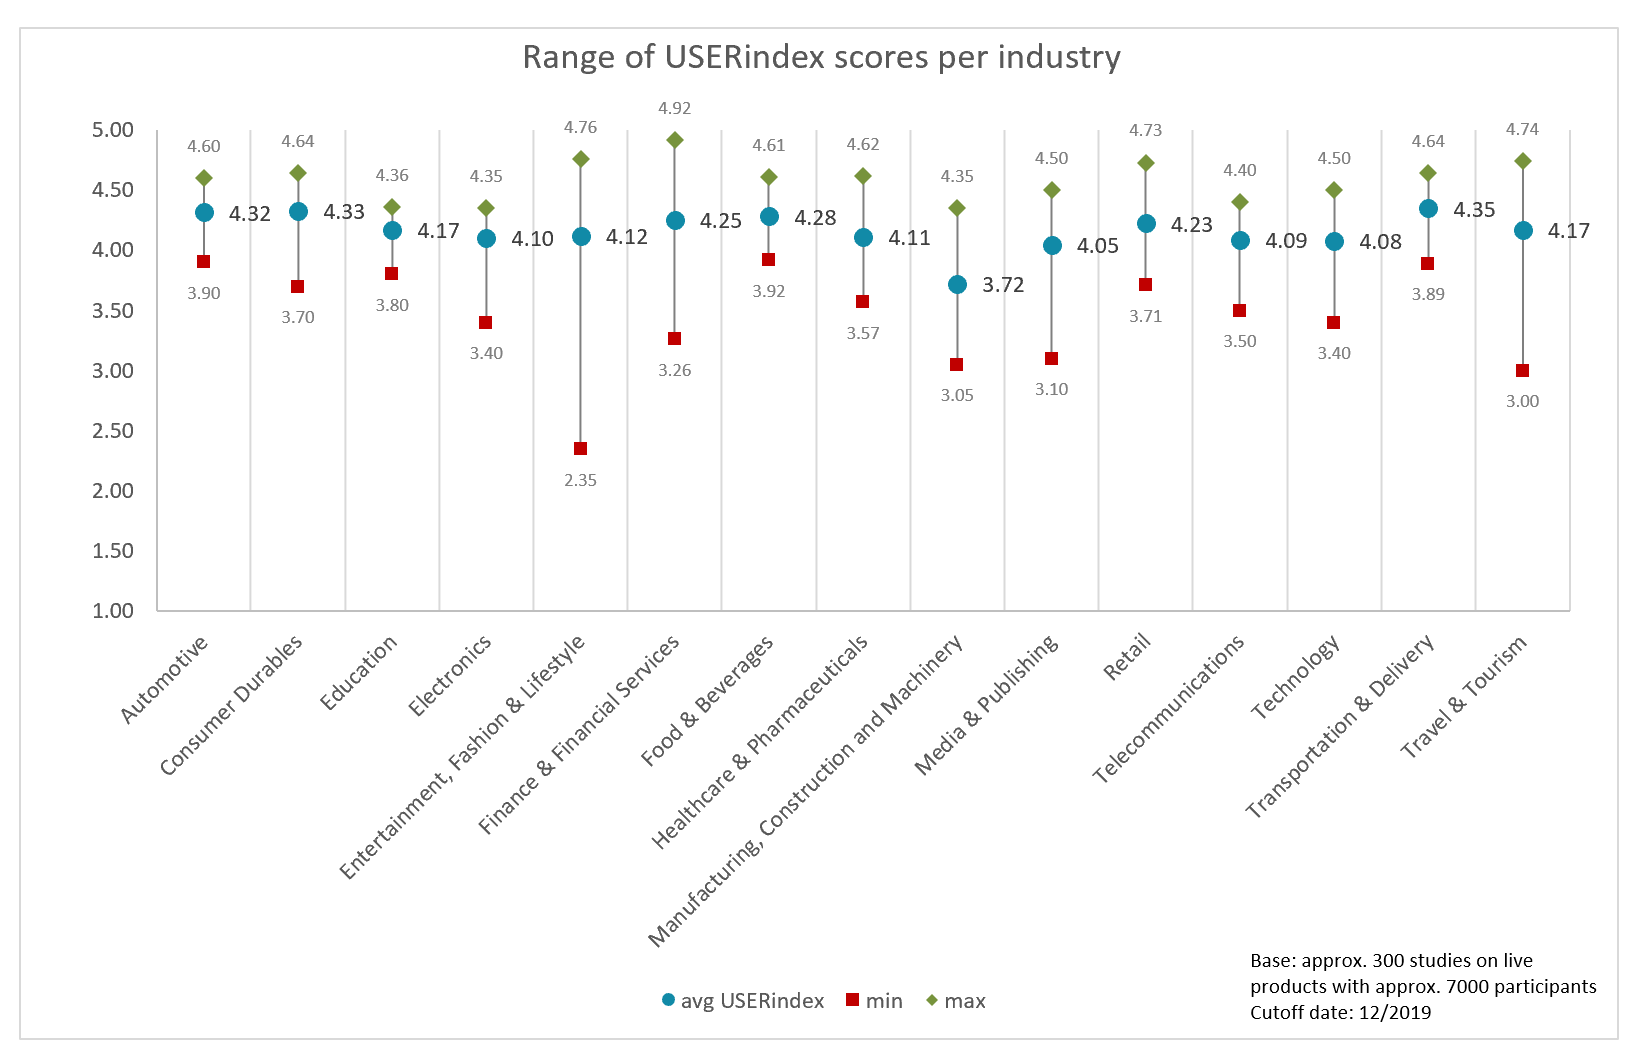 The value range of USERindex scores per industry for 2019